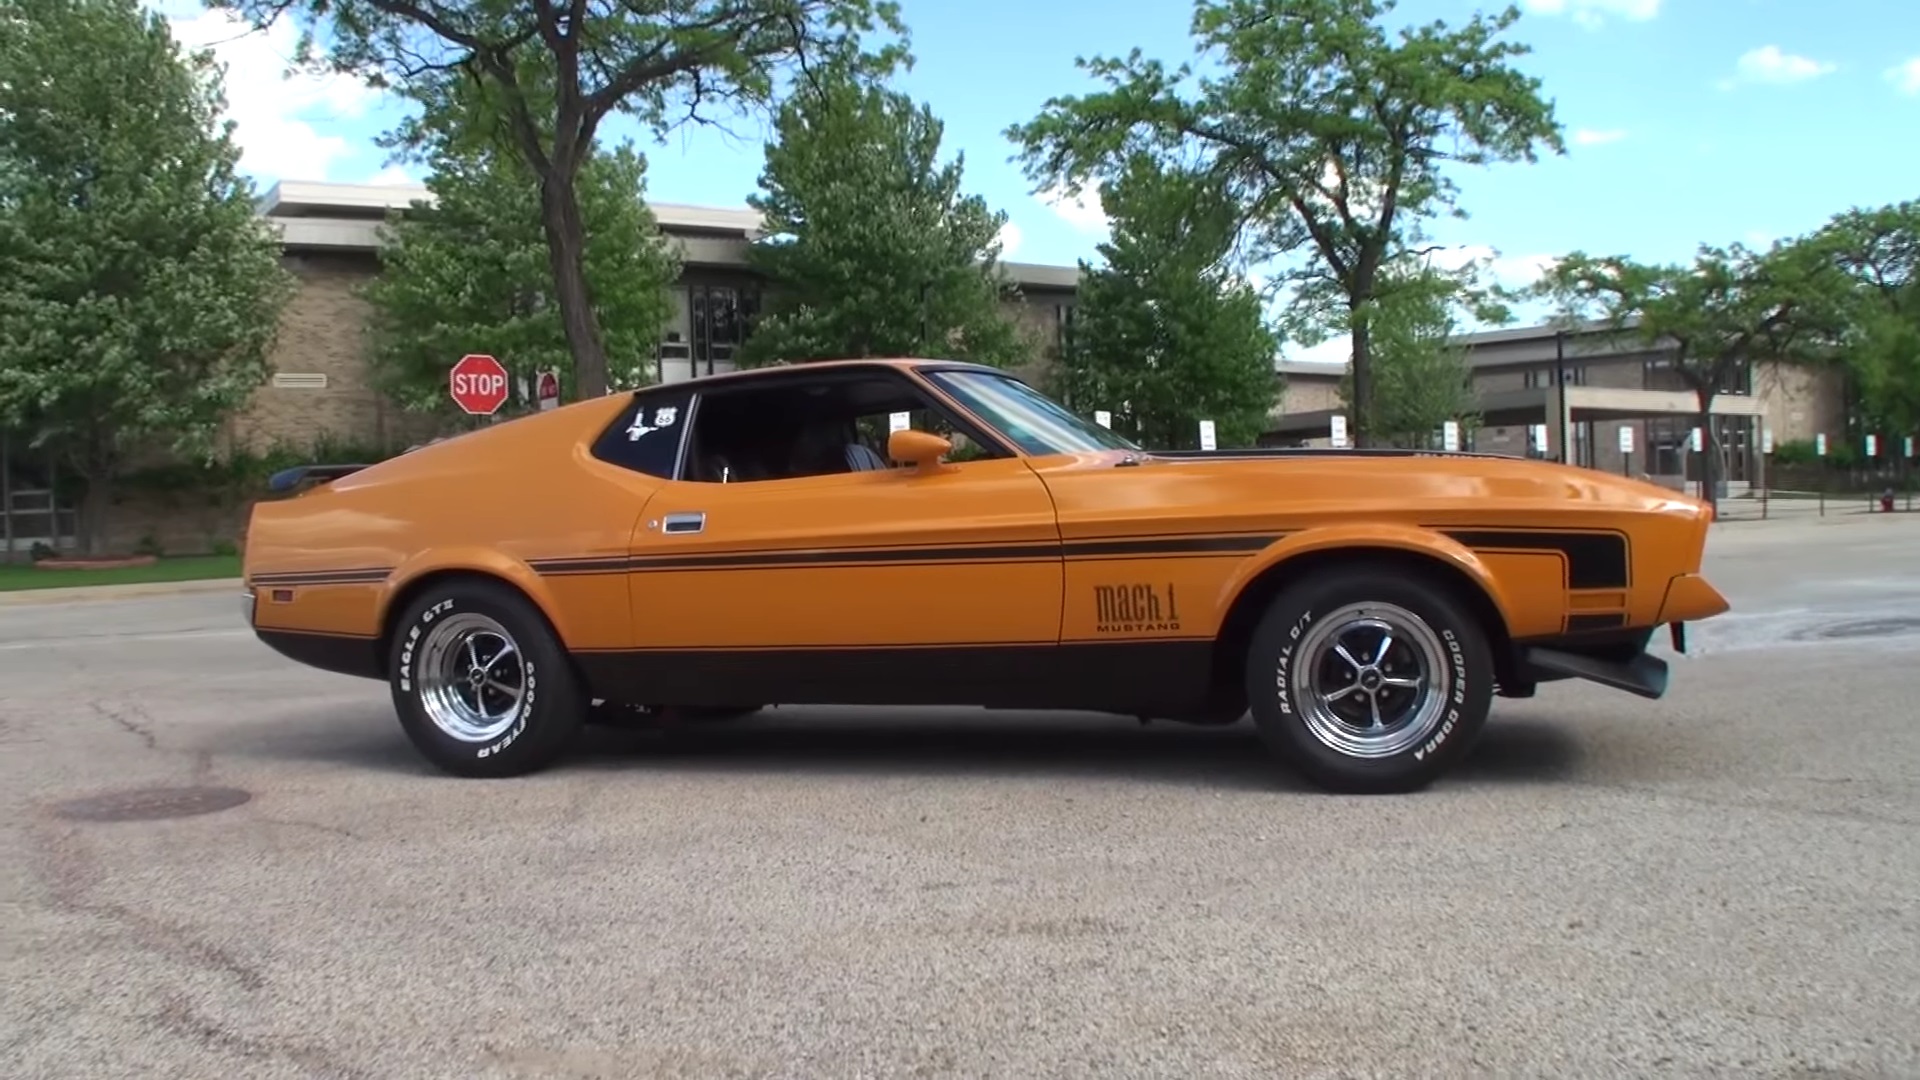 Video: 1972 Ford Mustang Mach 1 351 Engine Sound